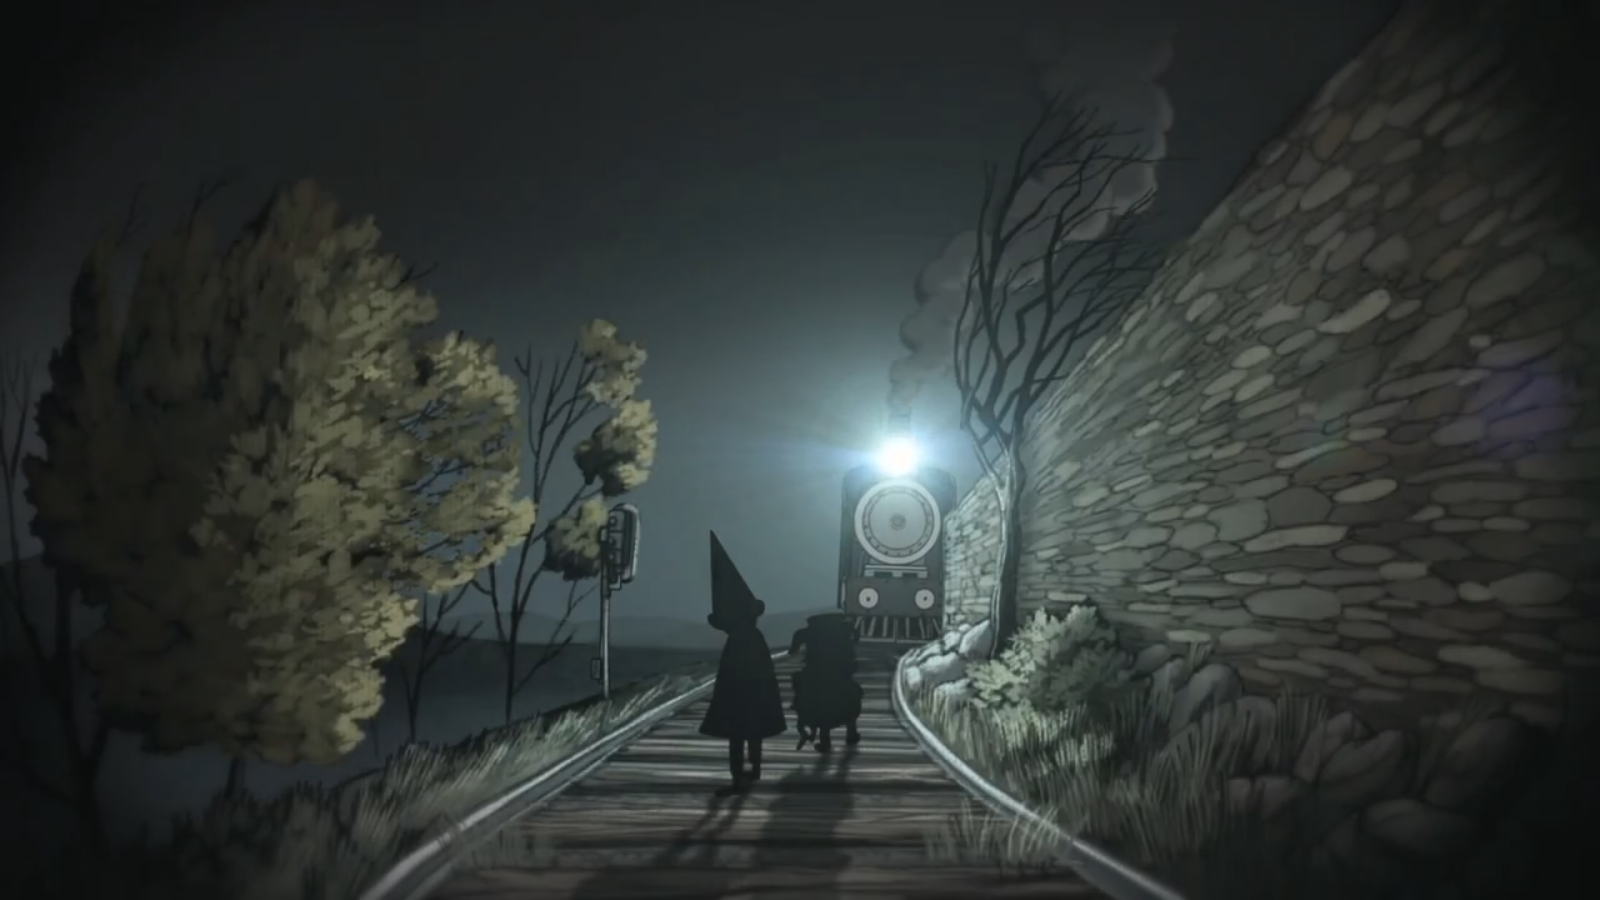 This is an image from the show Over the Garden Wall.